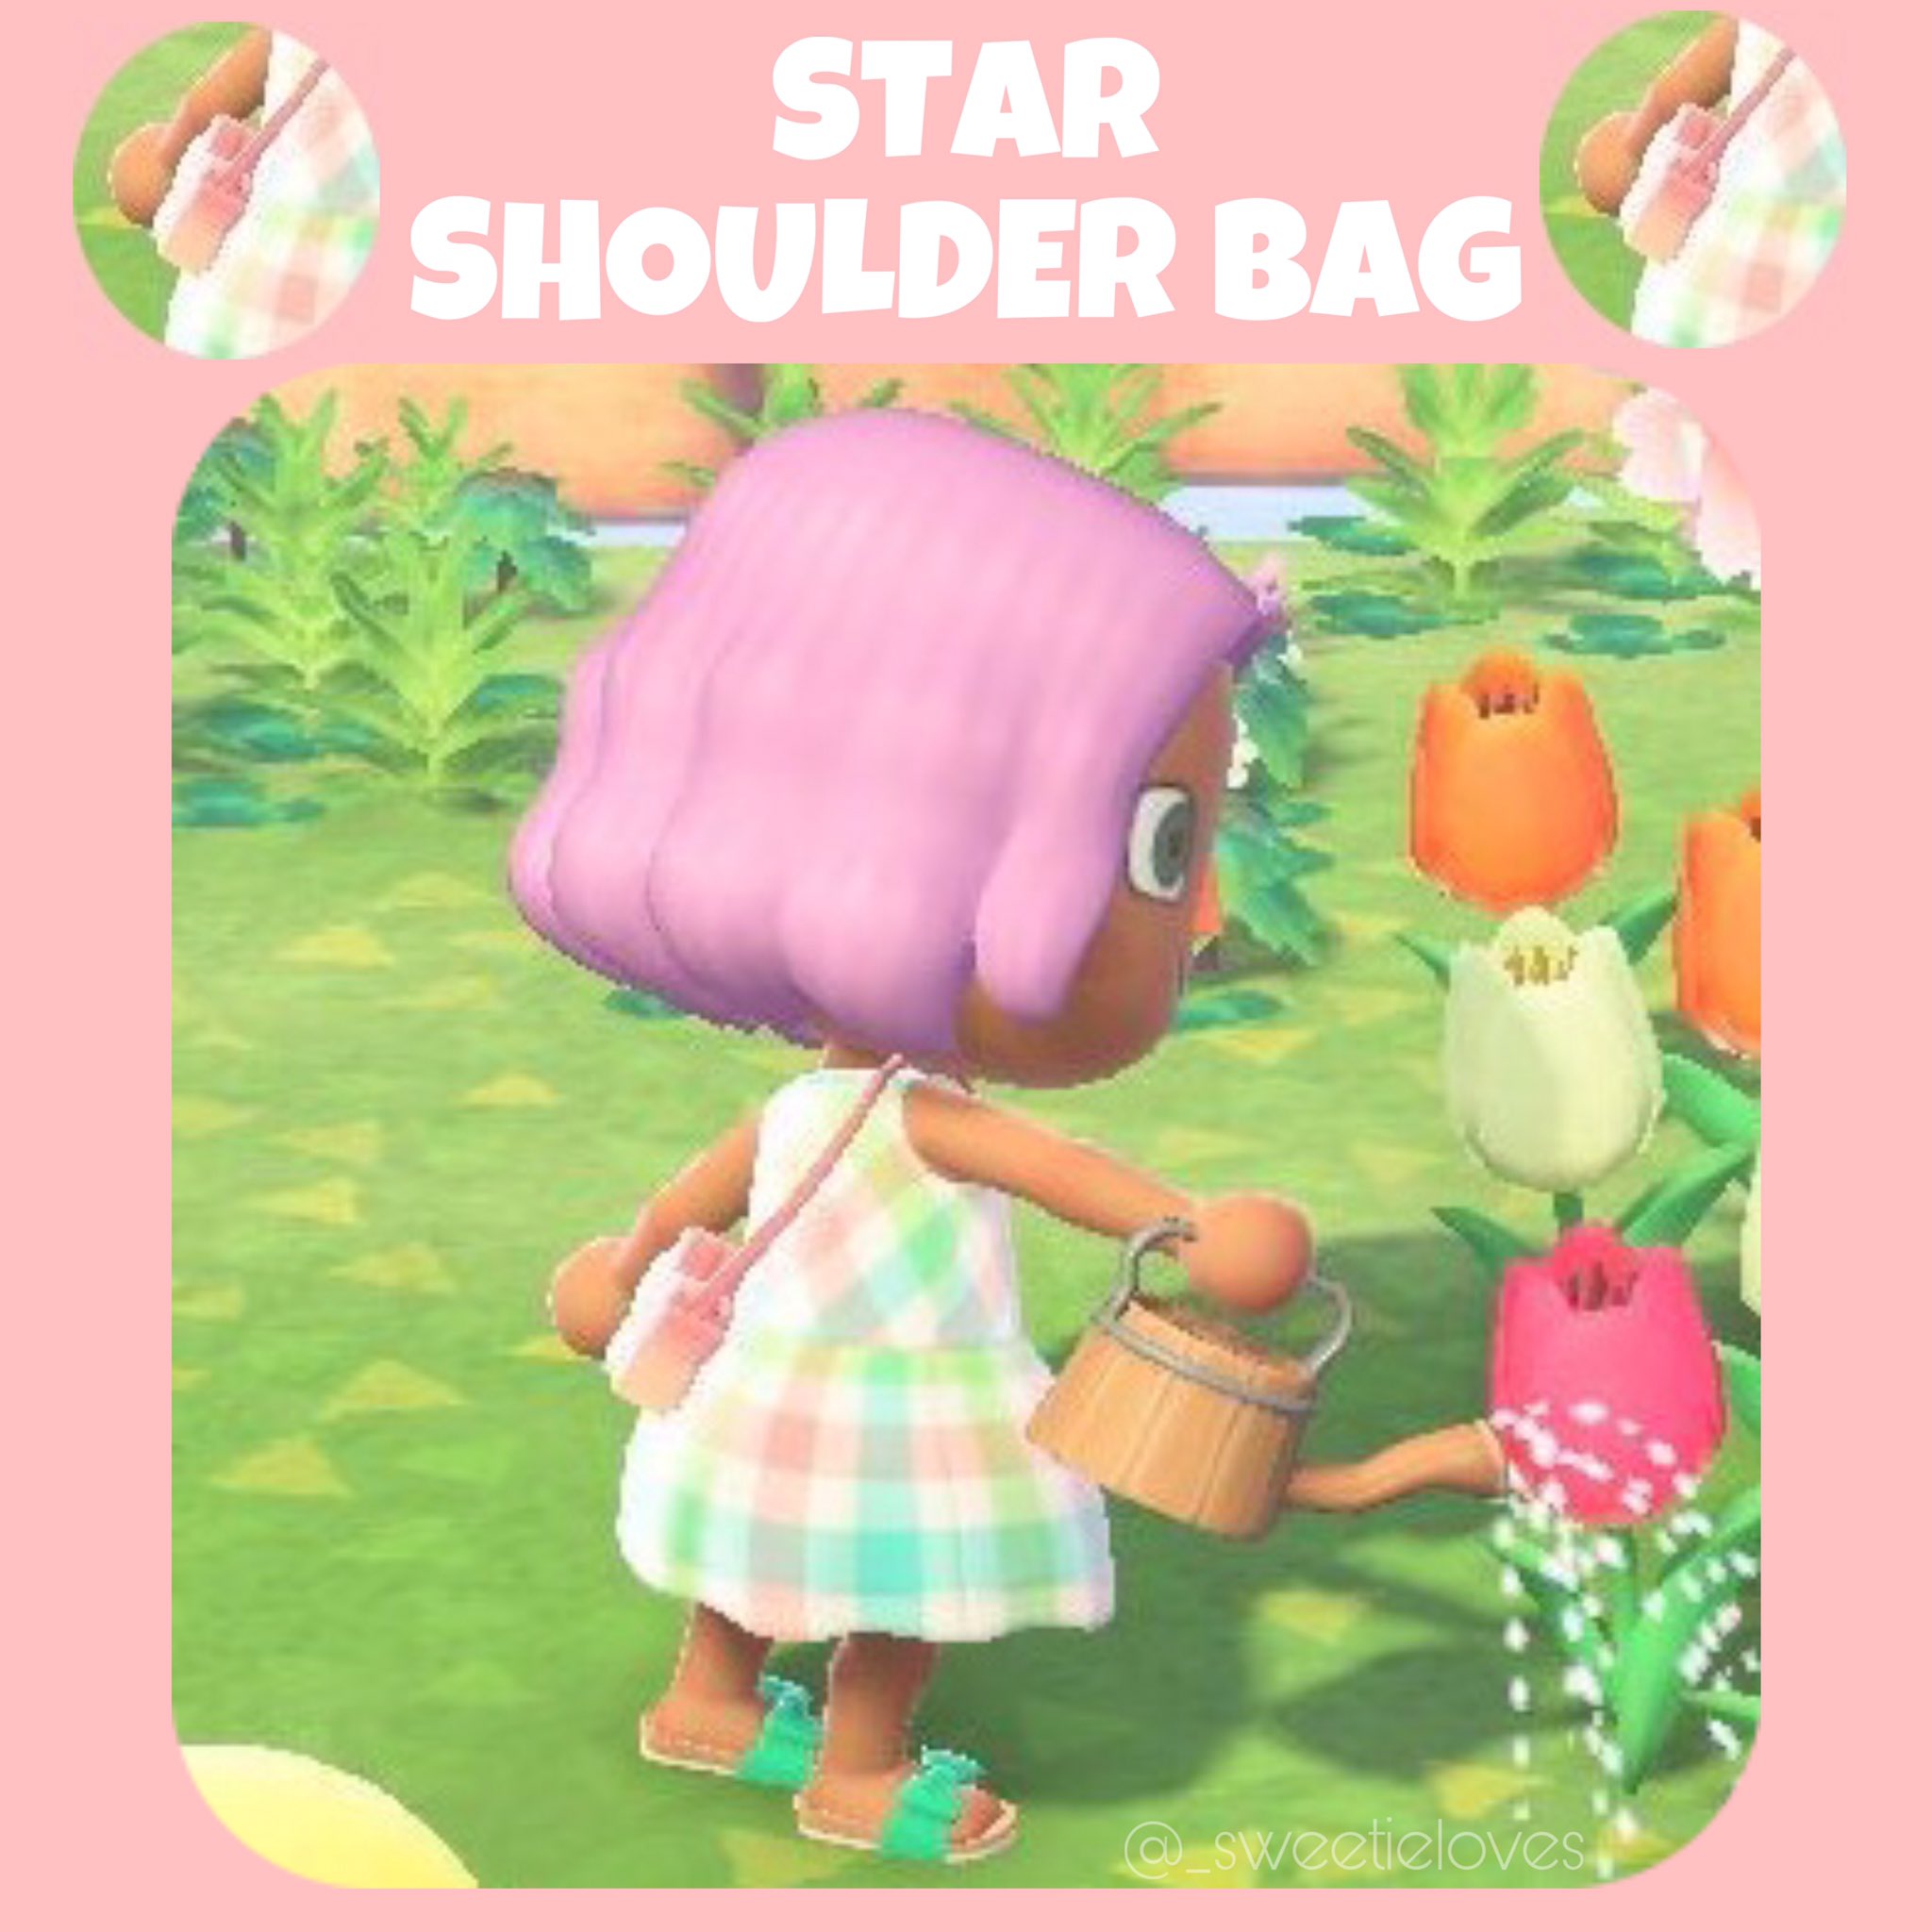 🦜♡ Lala ♡🐦 on X: First though : A star shoulder bag, but after comments  on insta, it can be a cherry blossom too ⭐️ what do you think ?  #AnimalCrossingNewHorizons  / X